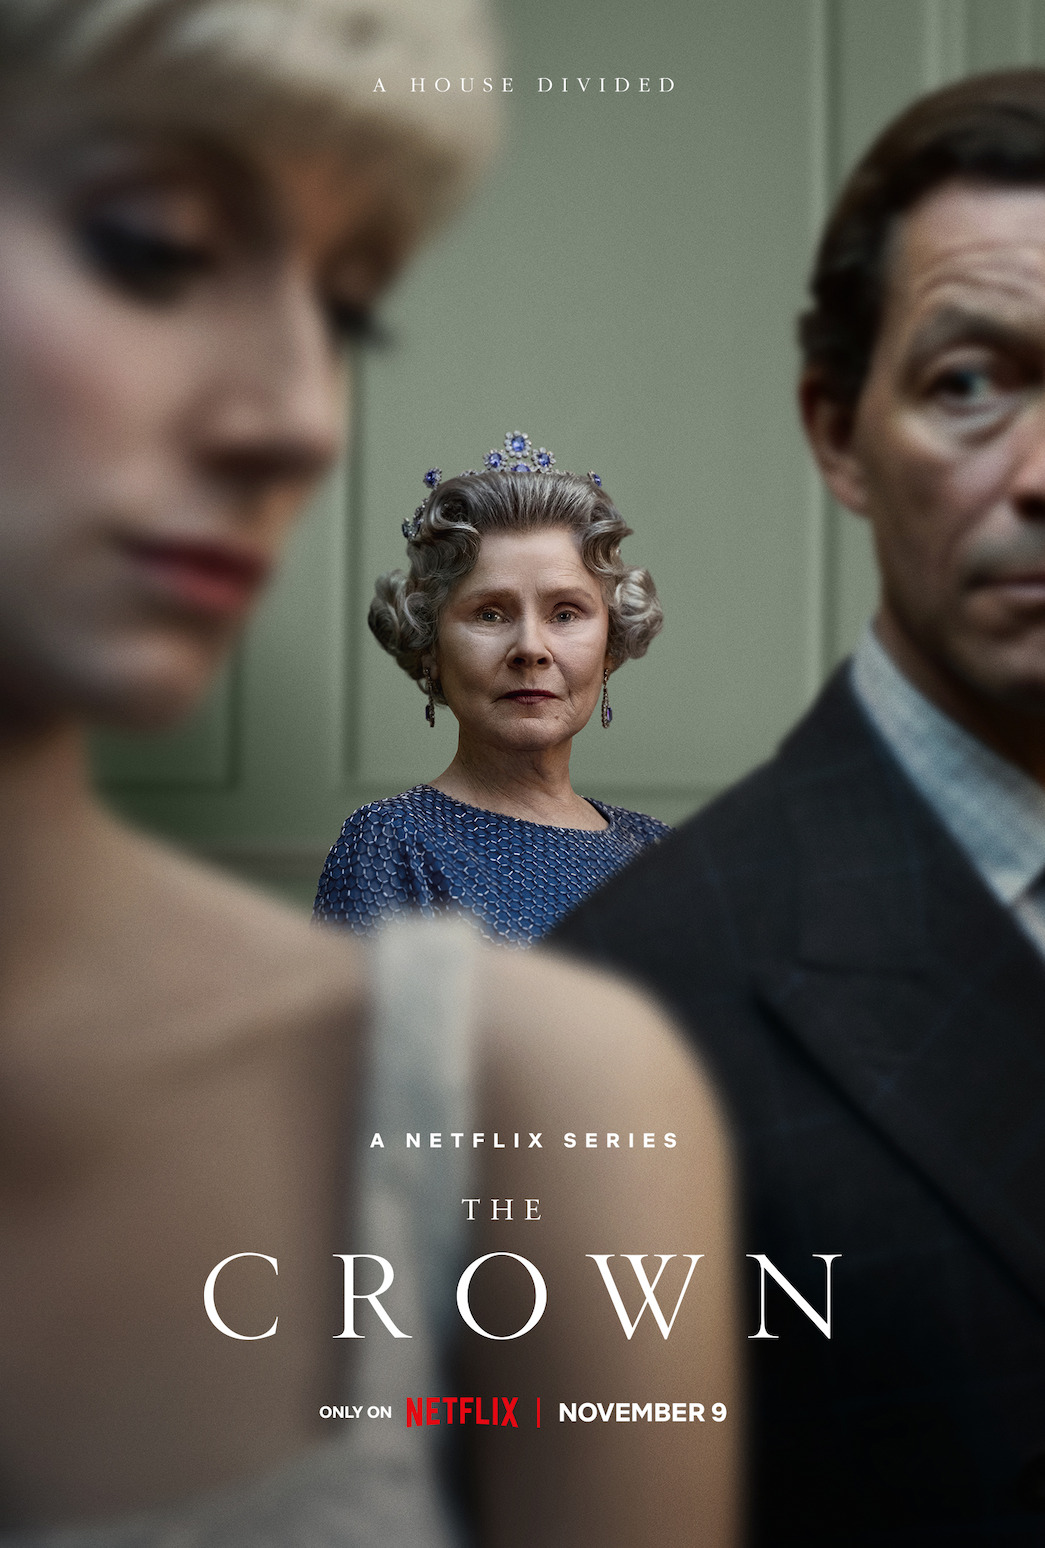 The Crown on Netflix series poster